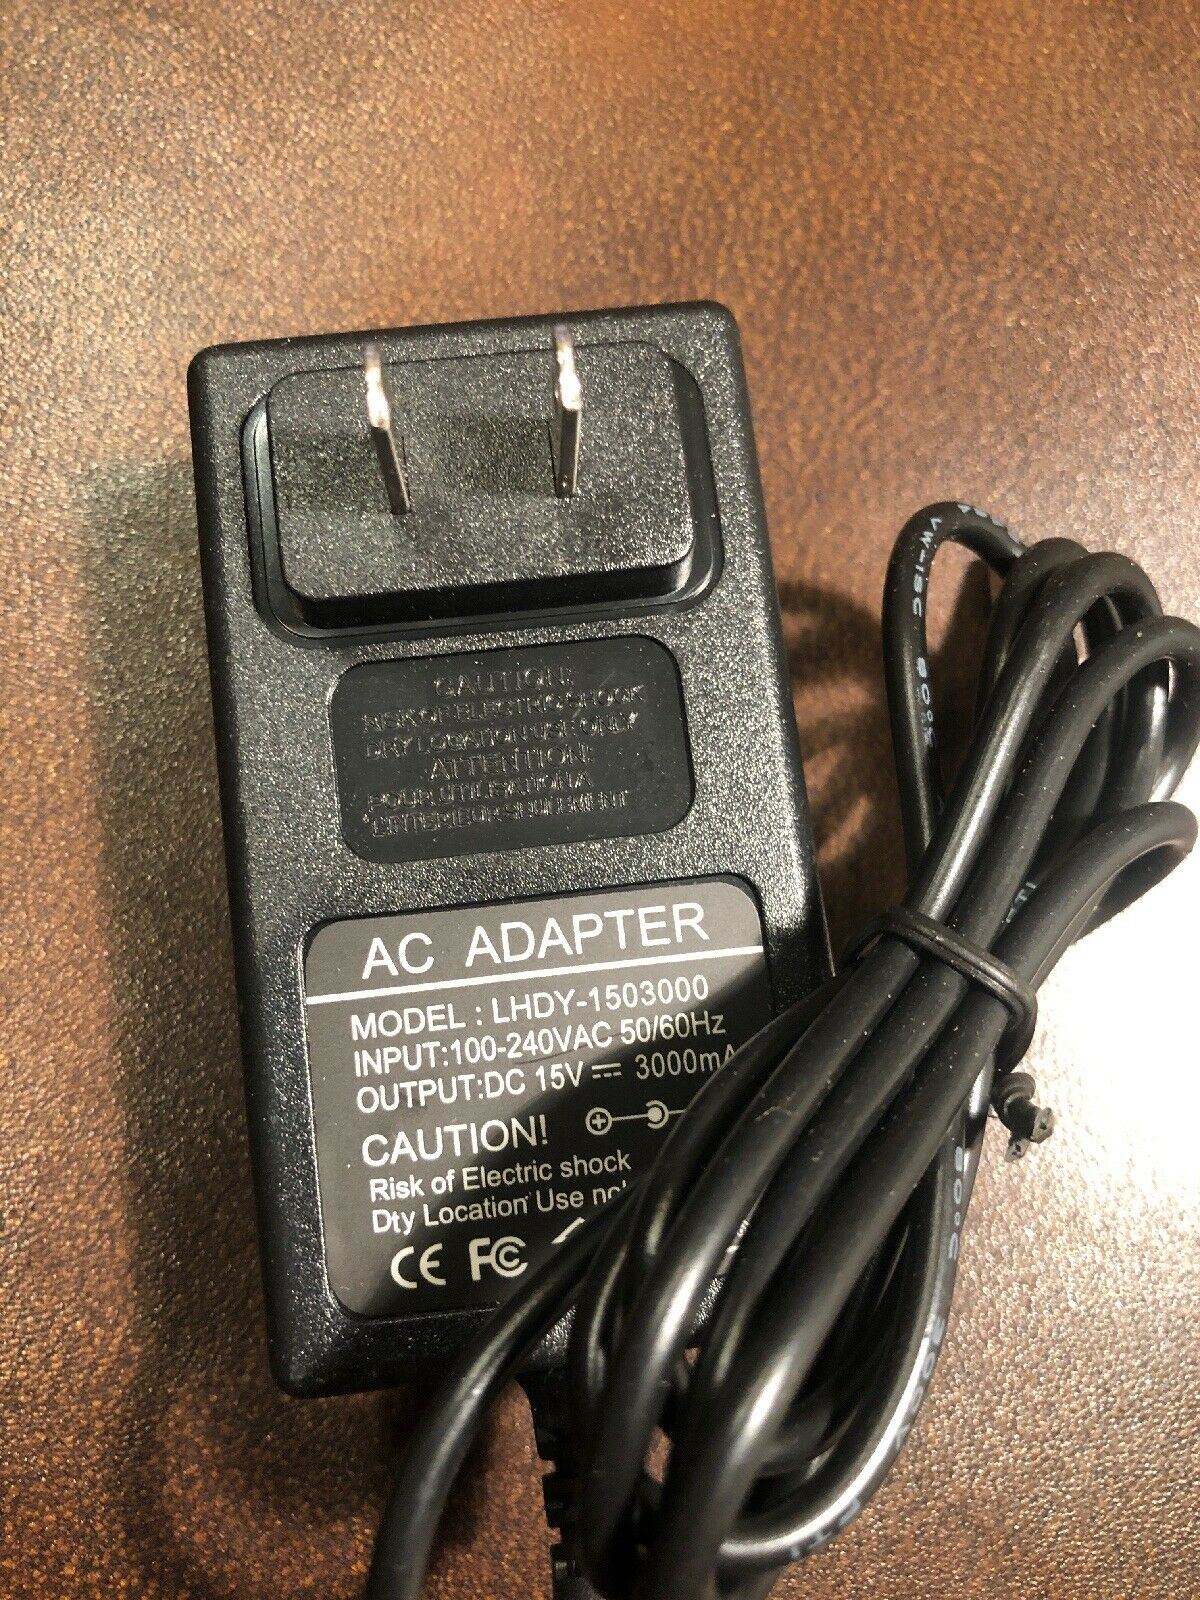 New AC Adapter LHDY-1503000 Power Supply 15V 3000mA - Click Image to Close